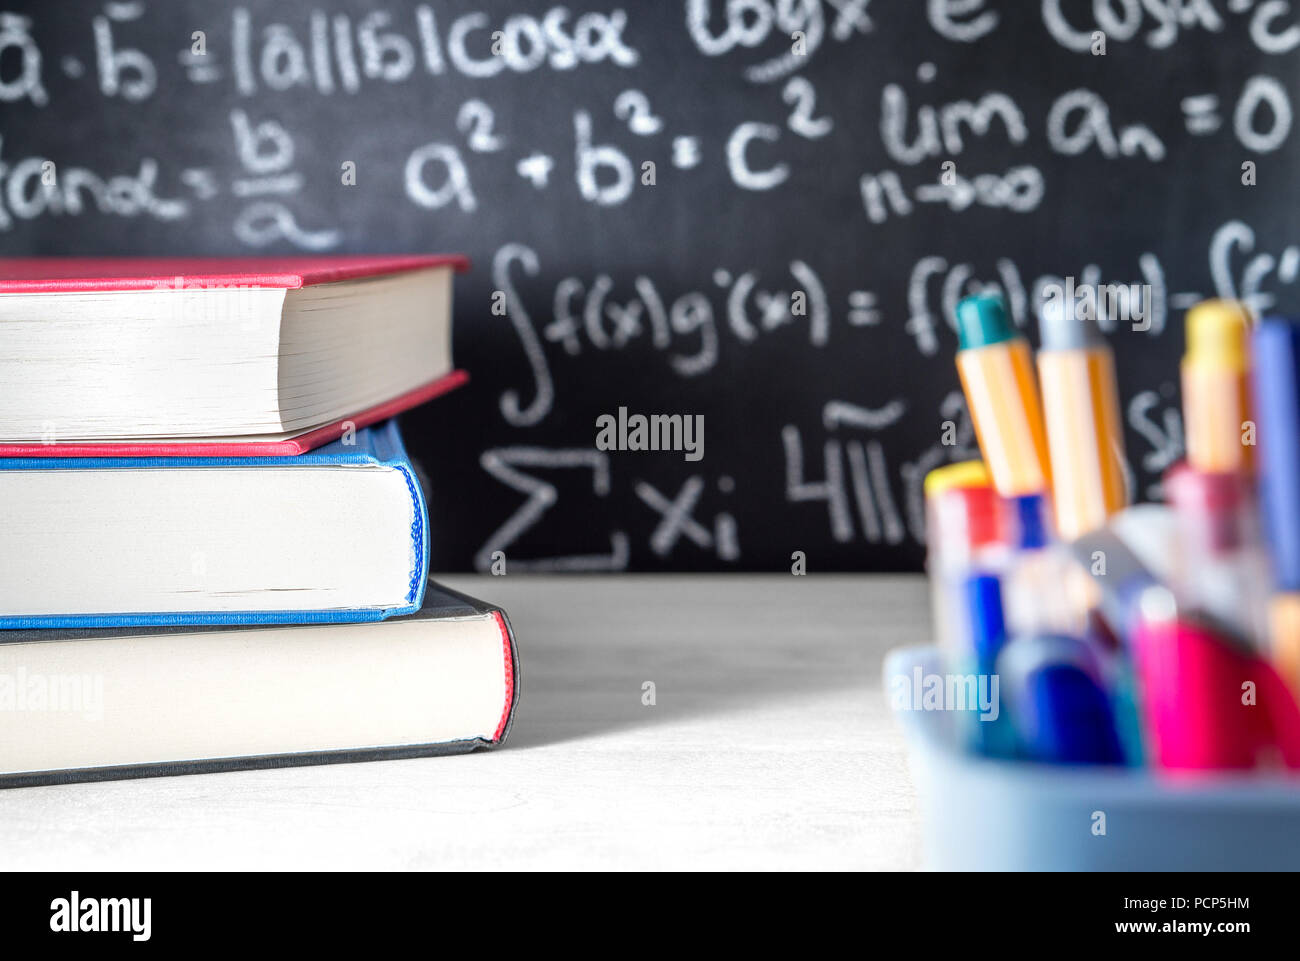 School supplies in classroom. Blackboard or chalkboard in class. Teaching, lesson, lecture and science concept. Stock Photo